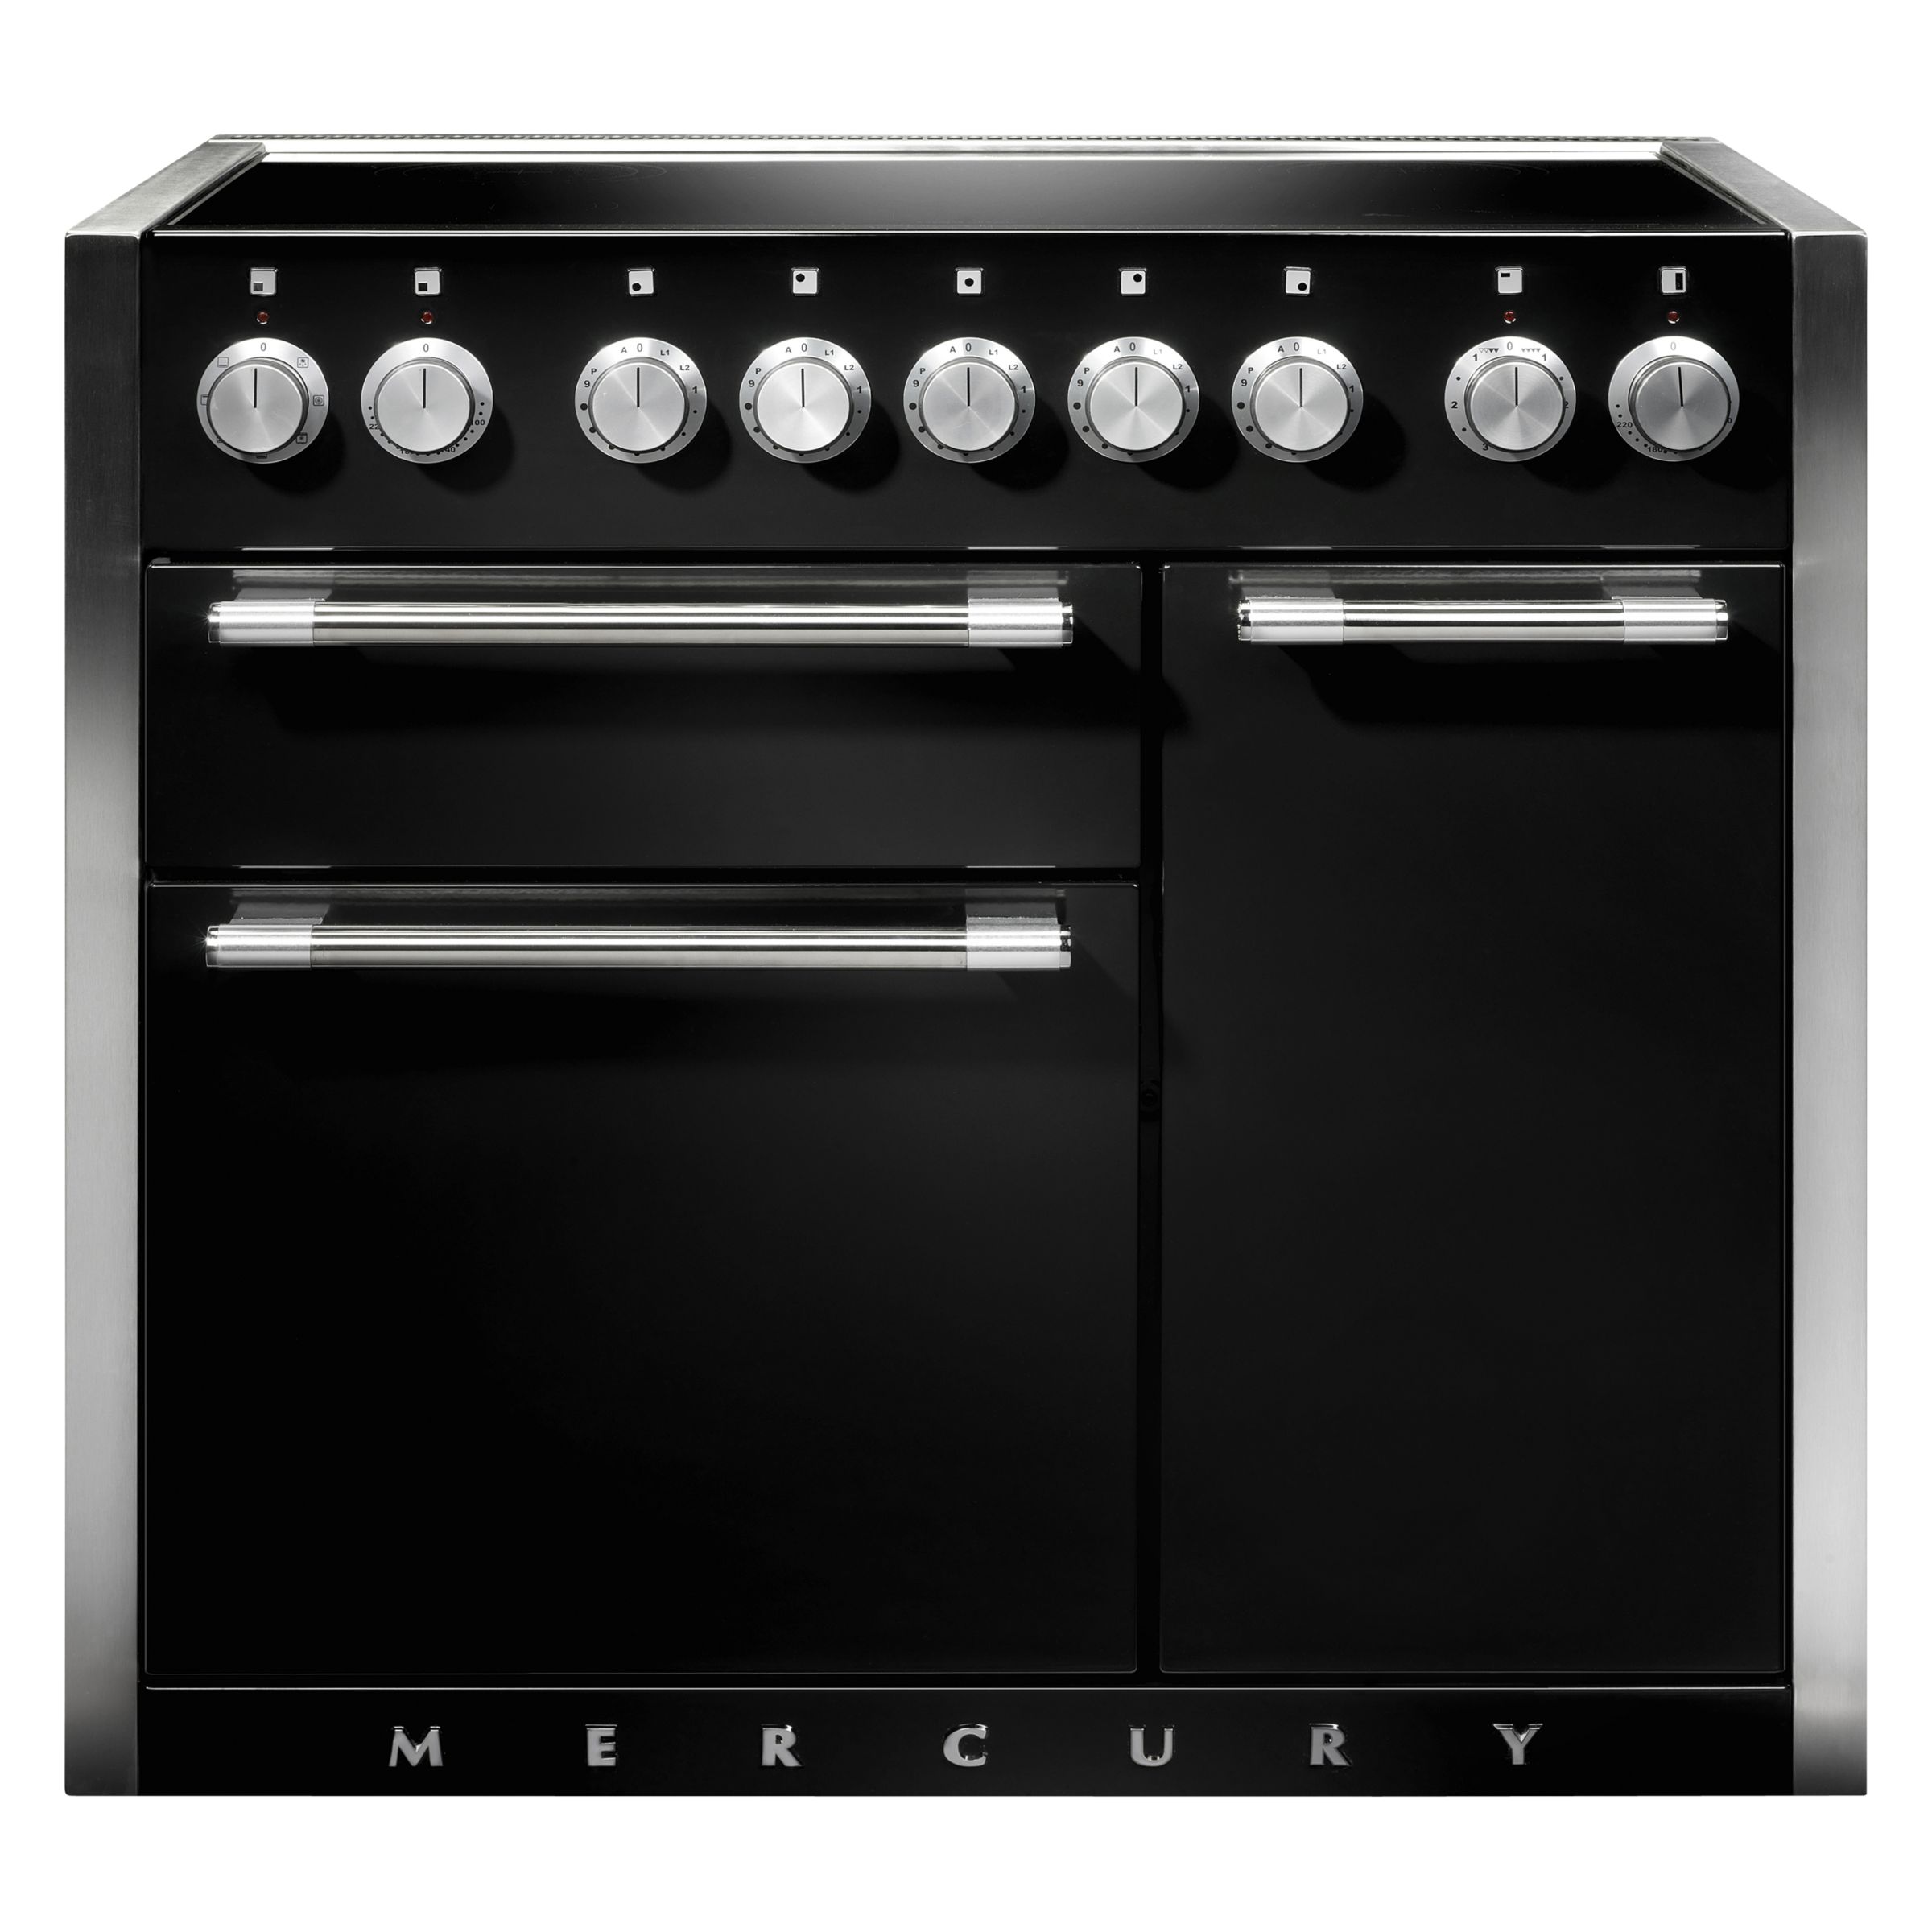 Mercury 1000 Electric Range Cooker with Induction Hob